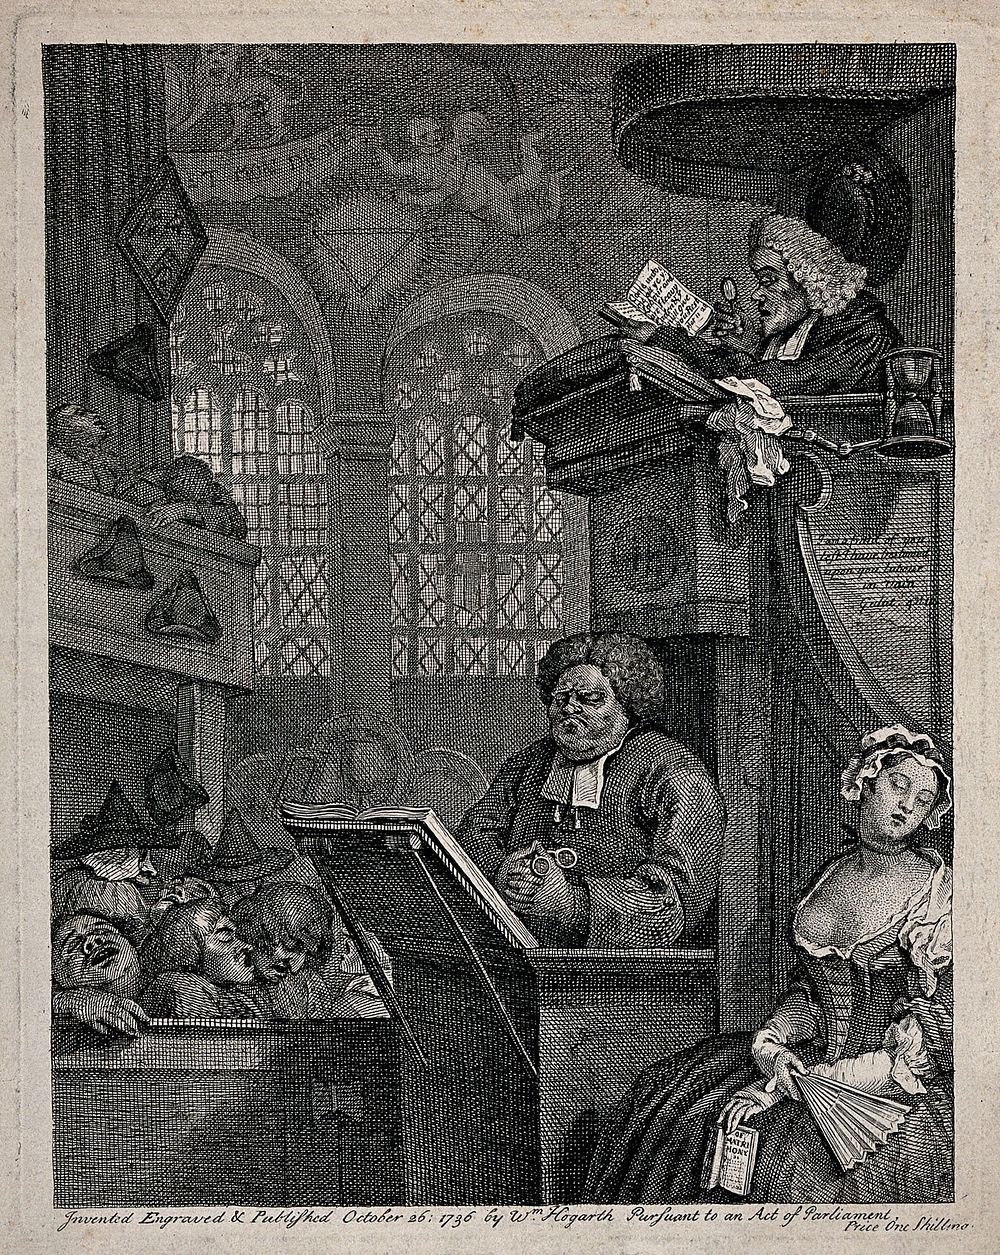 A sleepy congregation in a country church with one clergyman reading the serman with the aid of a magnifying glass and the…